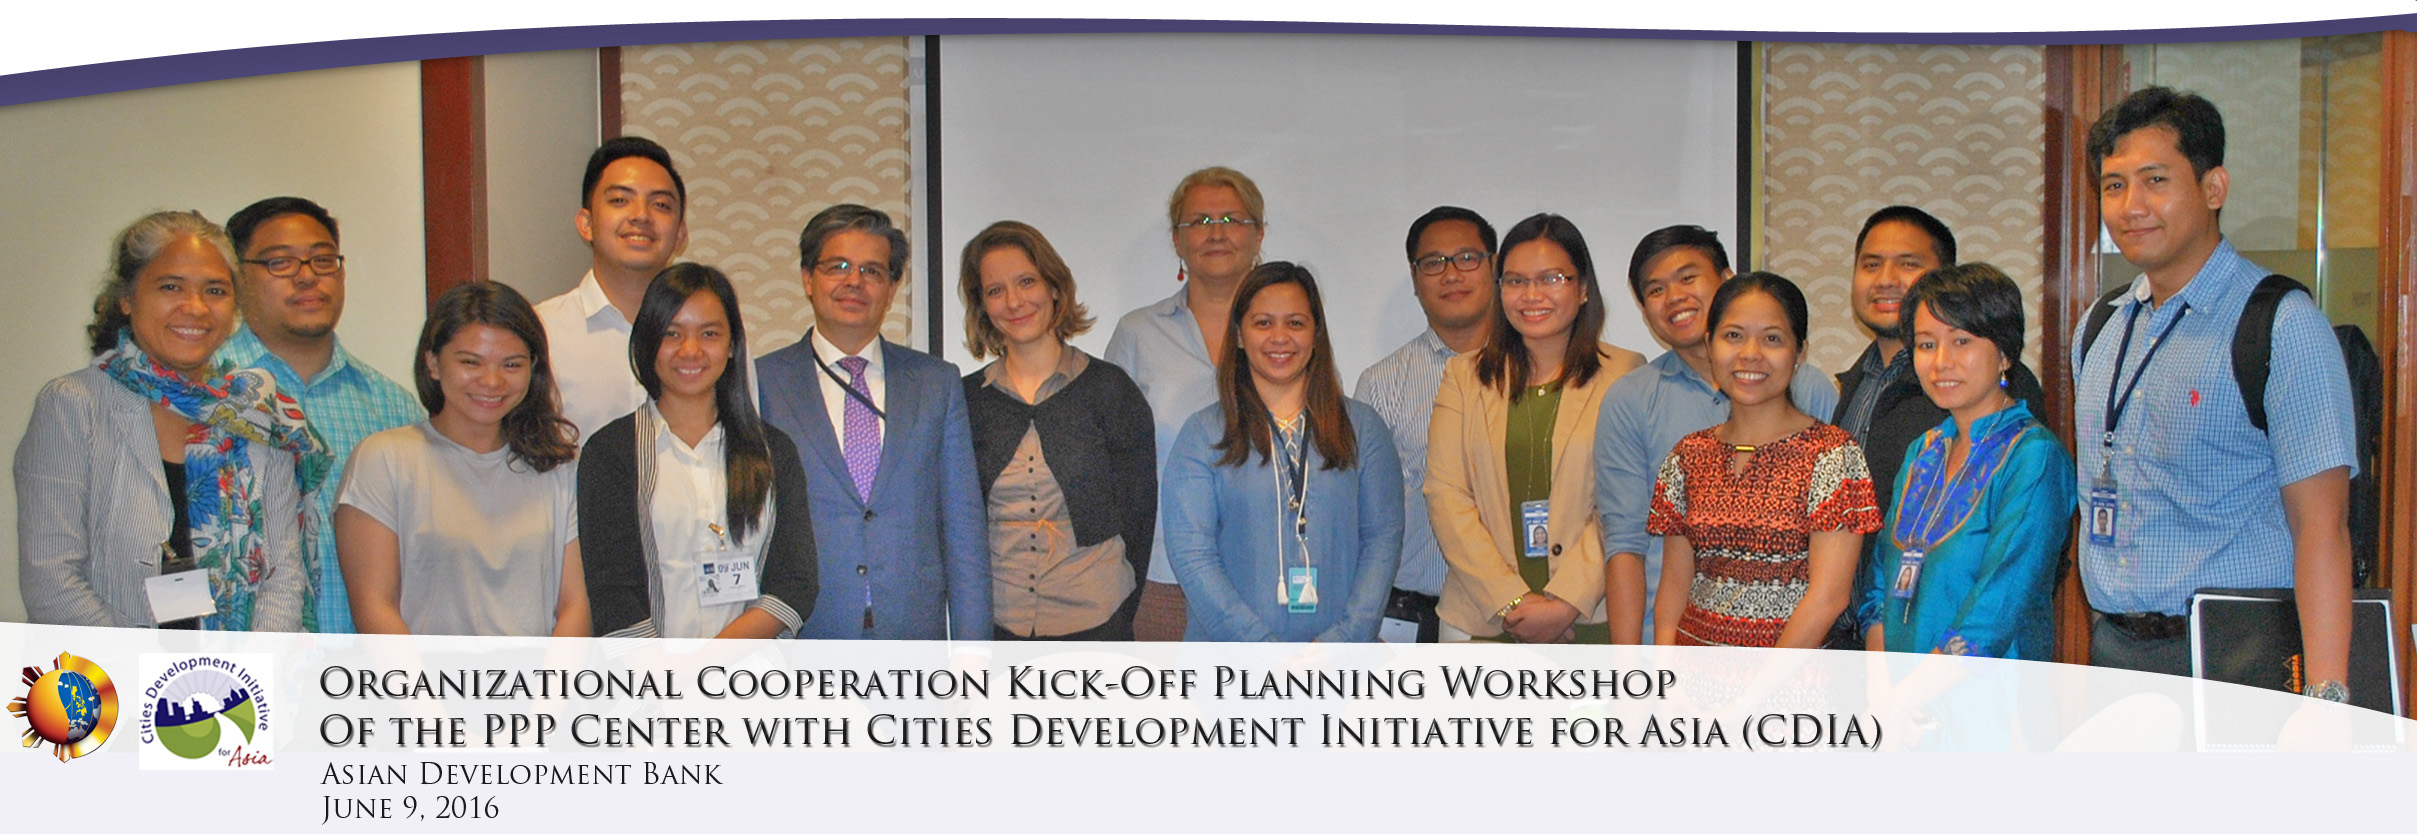 PPP Center and CDIA planning workshop